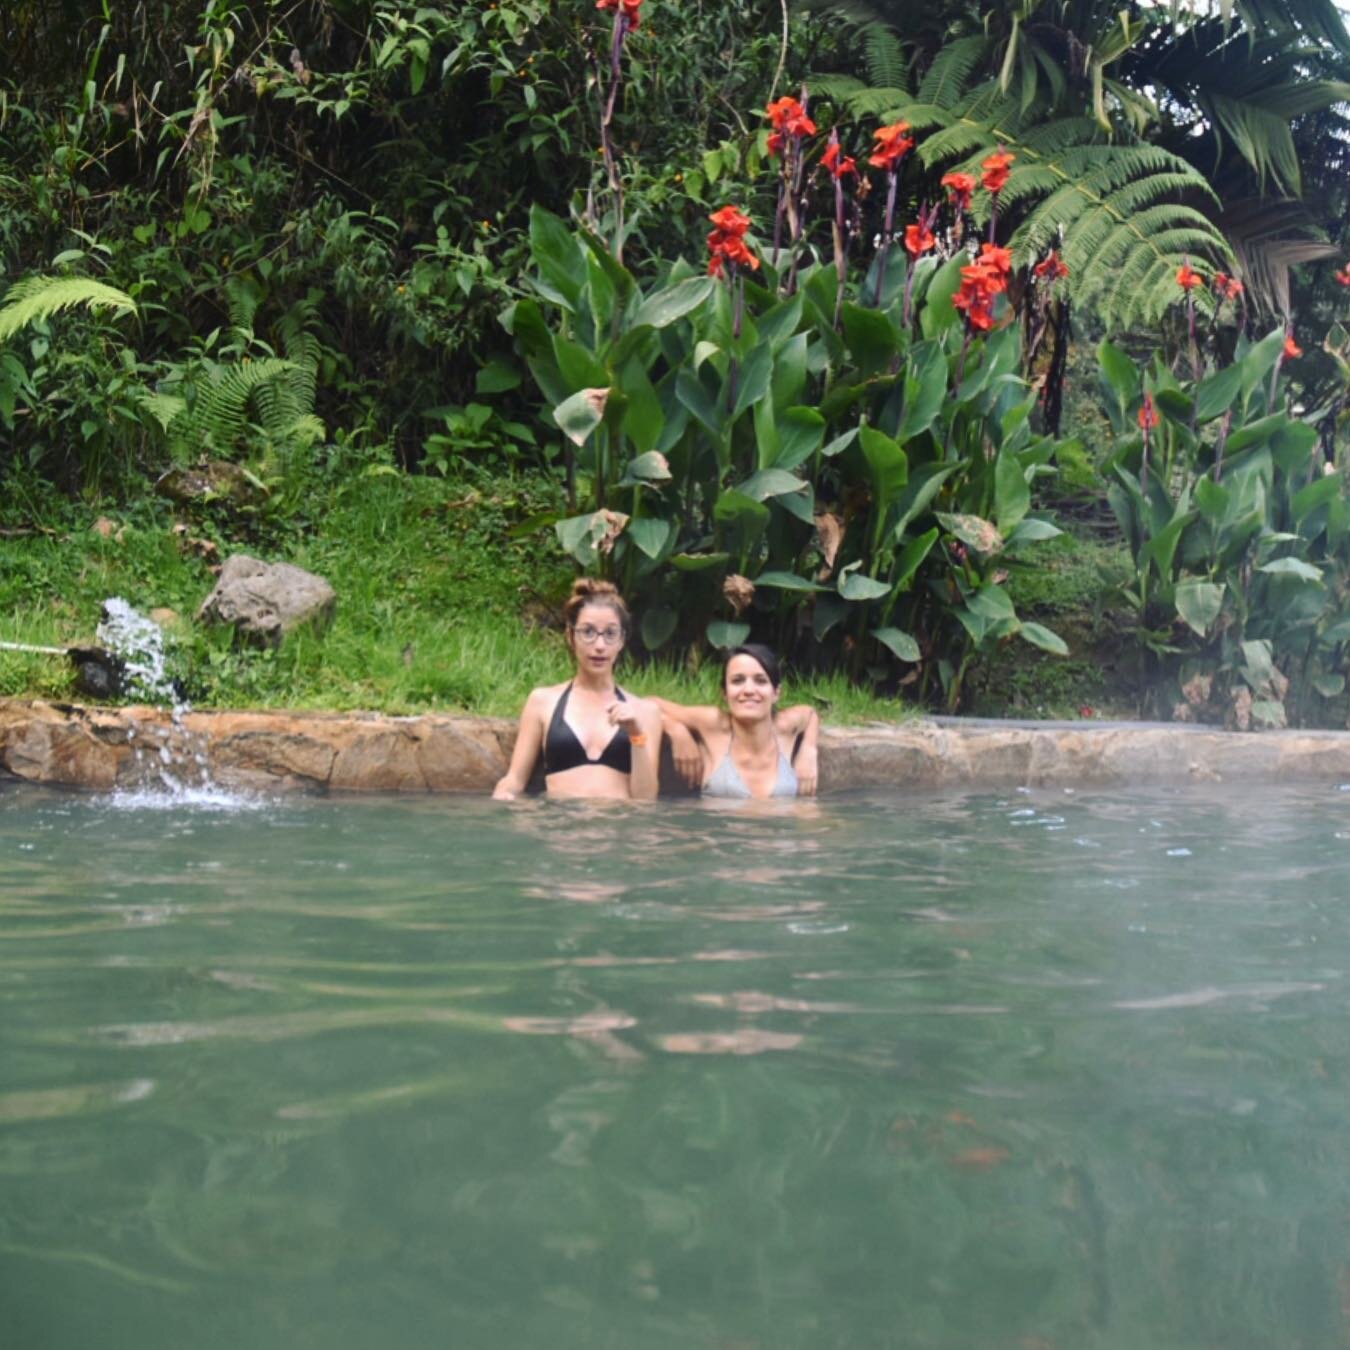 🇨🇴 Muscles recovery / natural thermal hot pools  #relaxmax#apresleffortlereconfort#detente😎#naturalhotpools#lacascada #wedeserveit#recompence